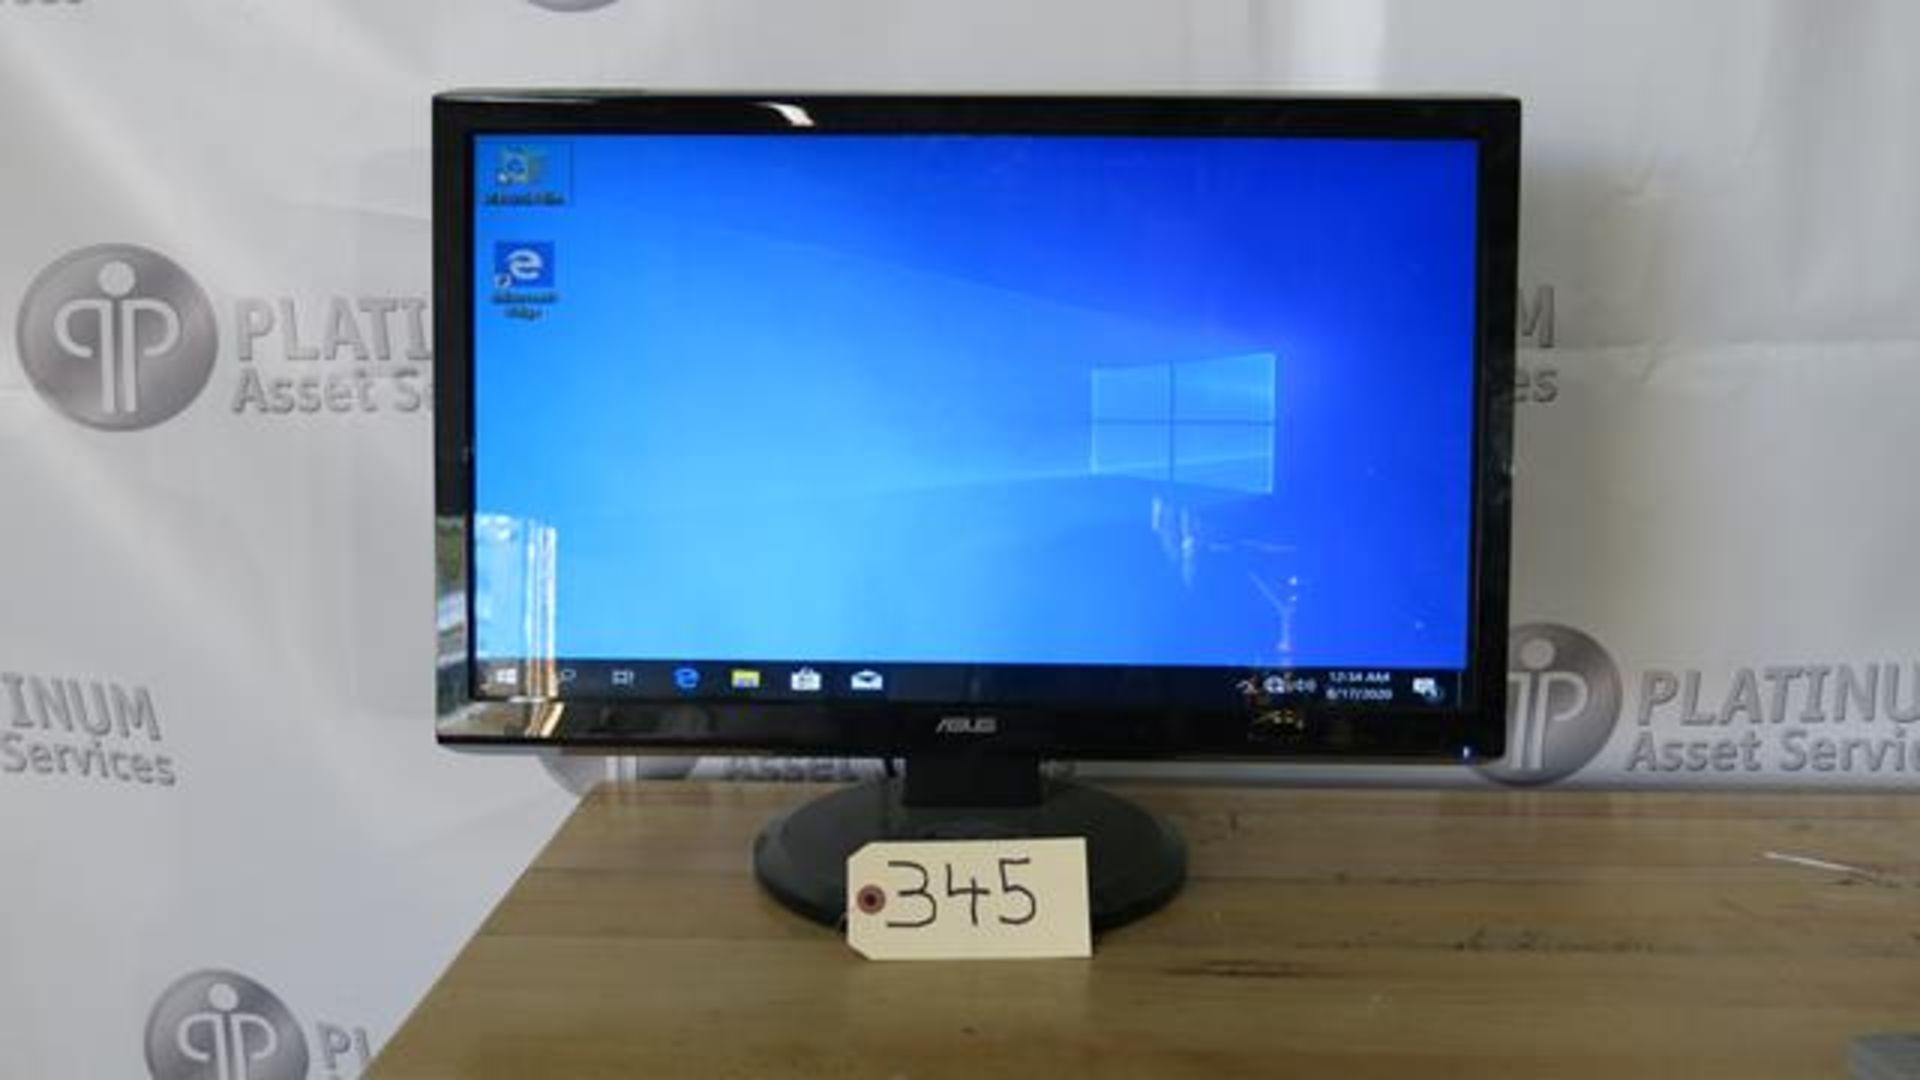 ASUS, VG236, 23", 3D CAPABLE, WIDESCREEN COMPUTER MONITOR (TAG#345)